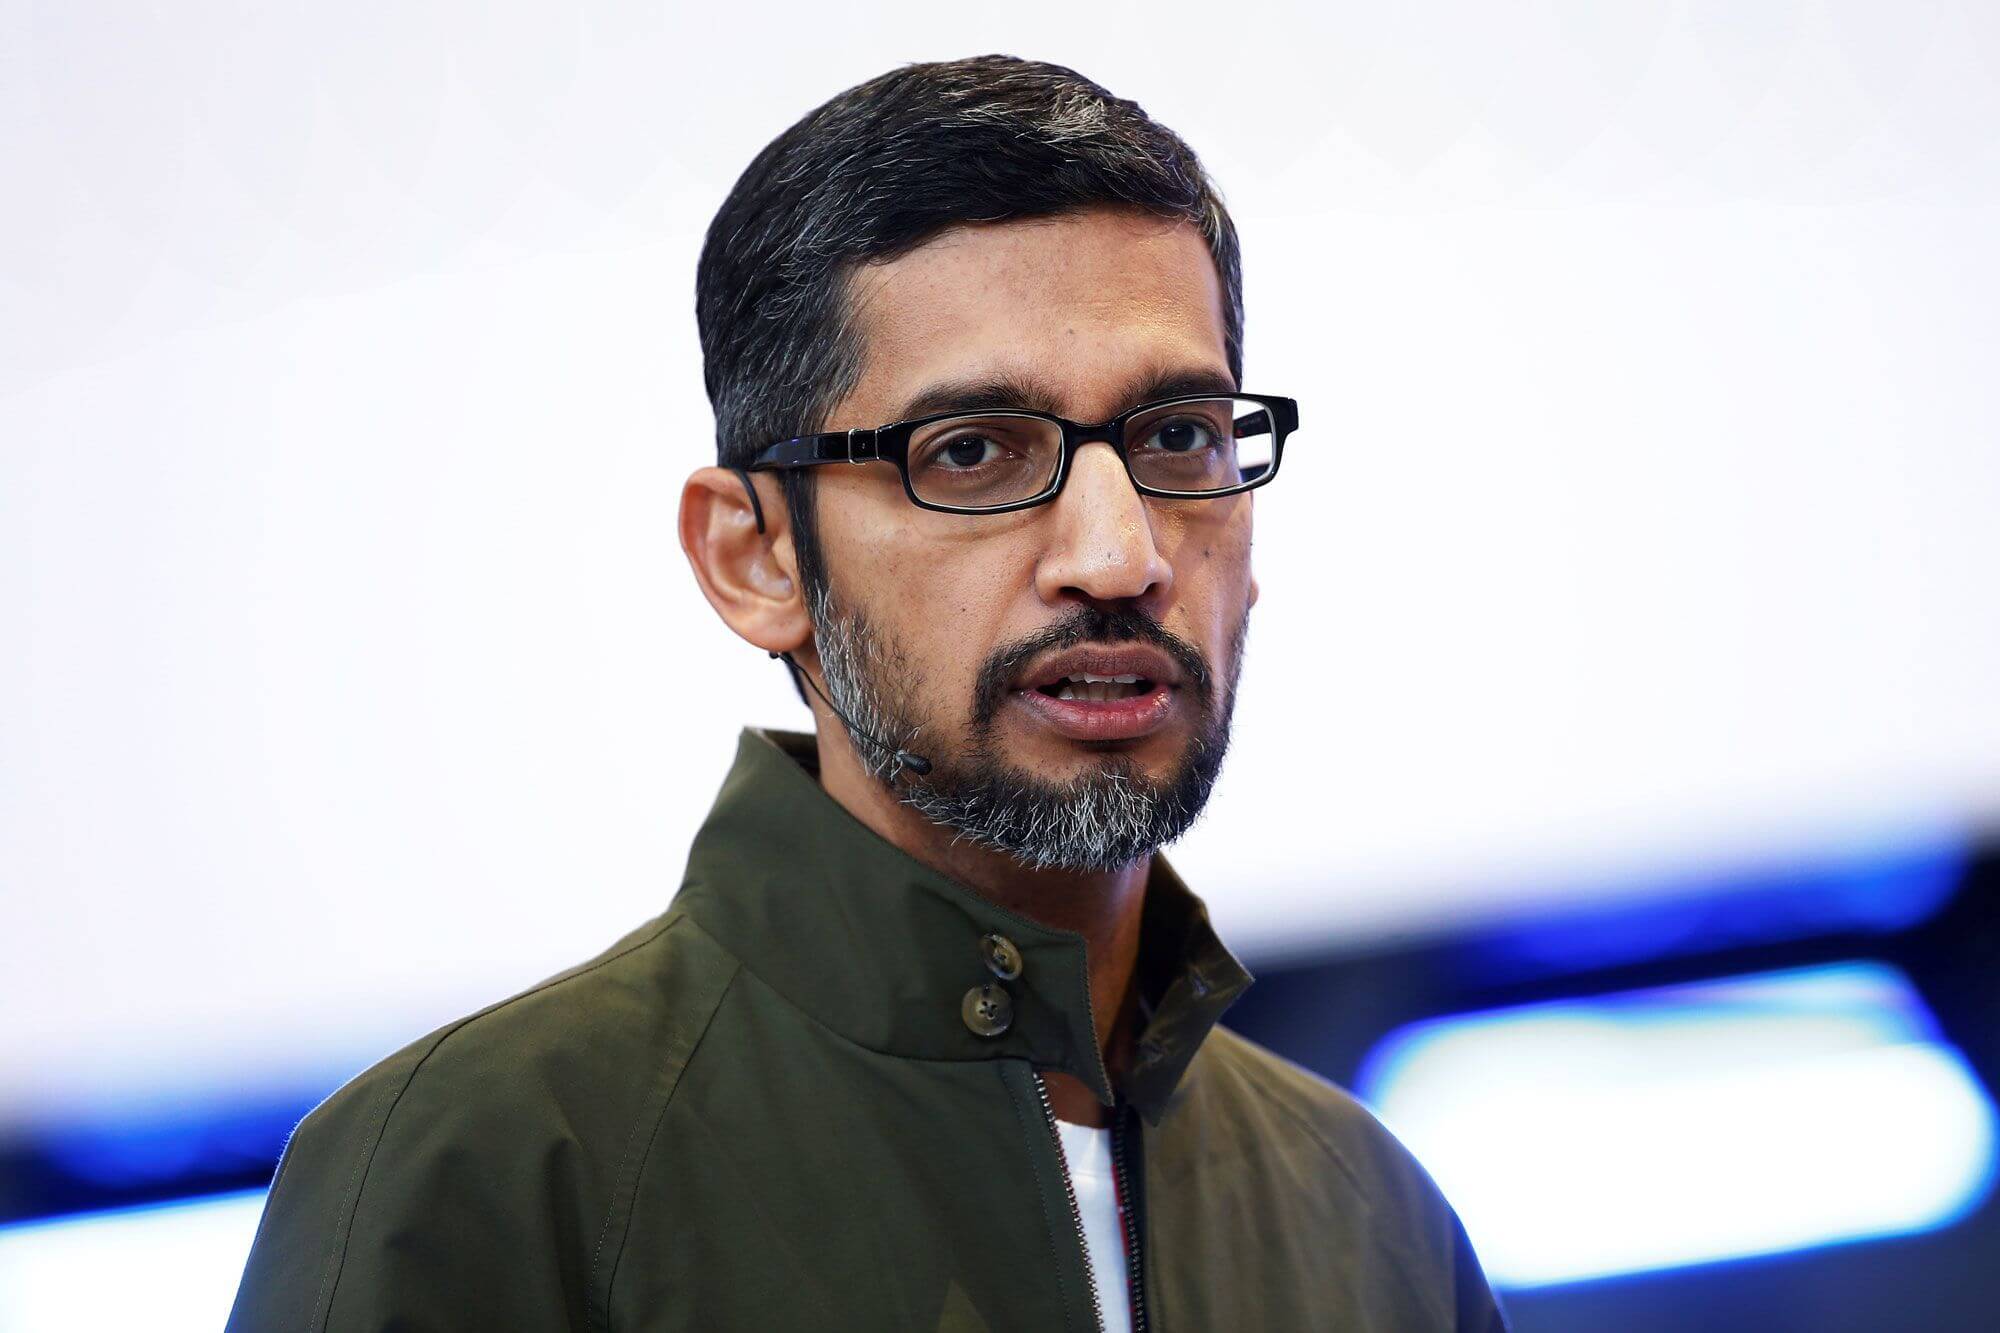 Google employees are leaving work in protest of handling of harassment and discrimination cases